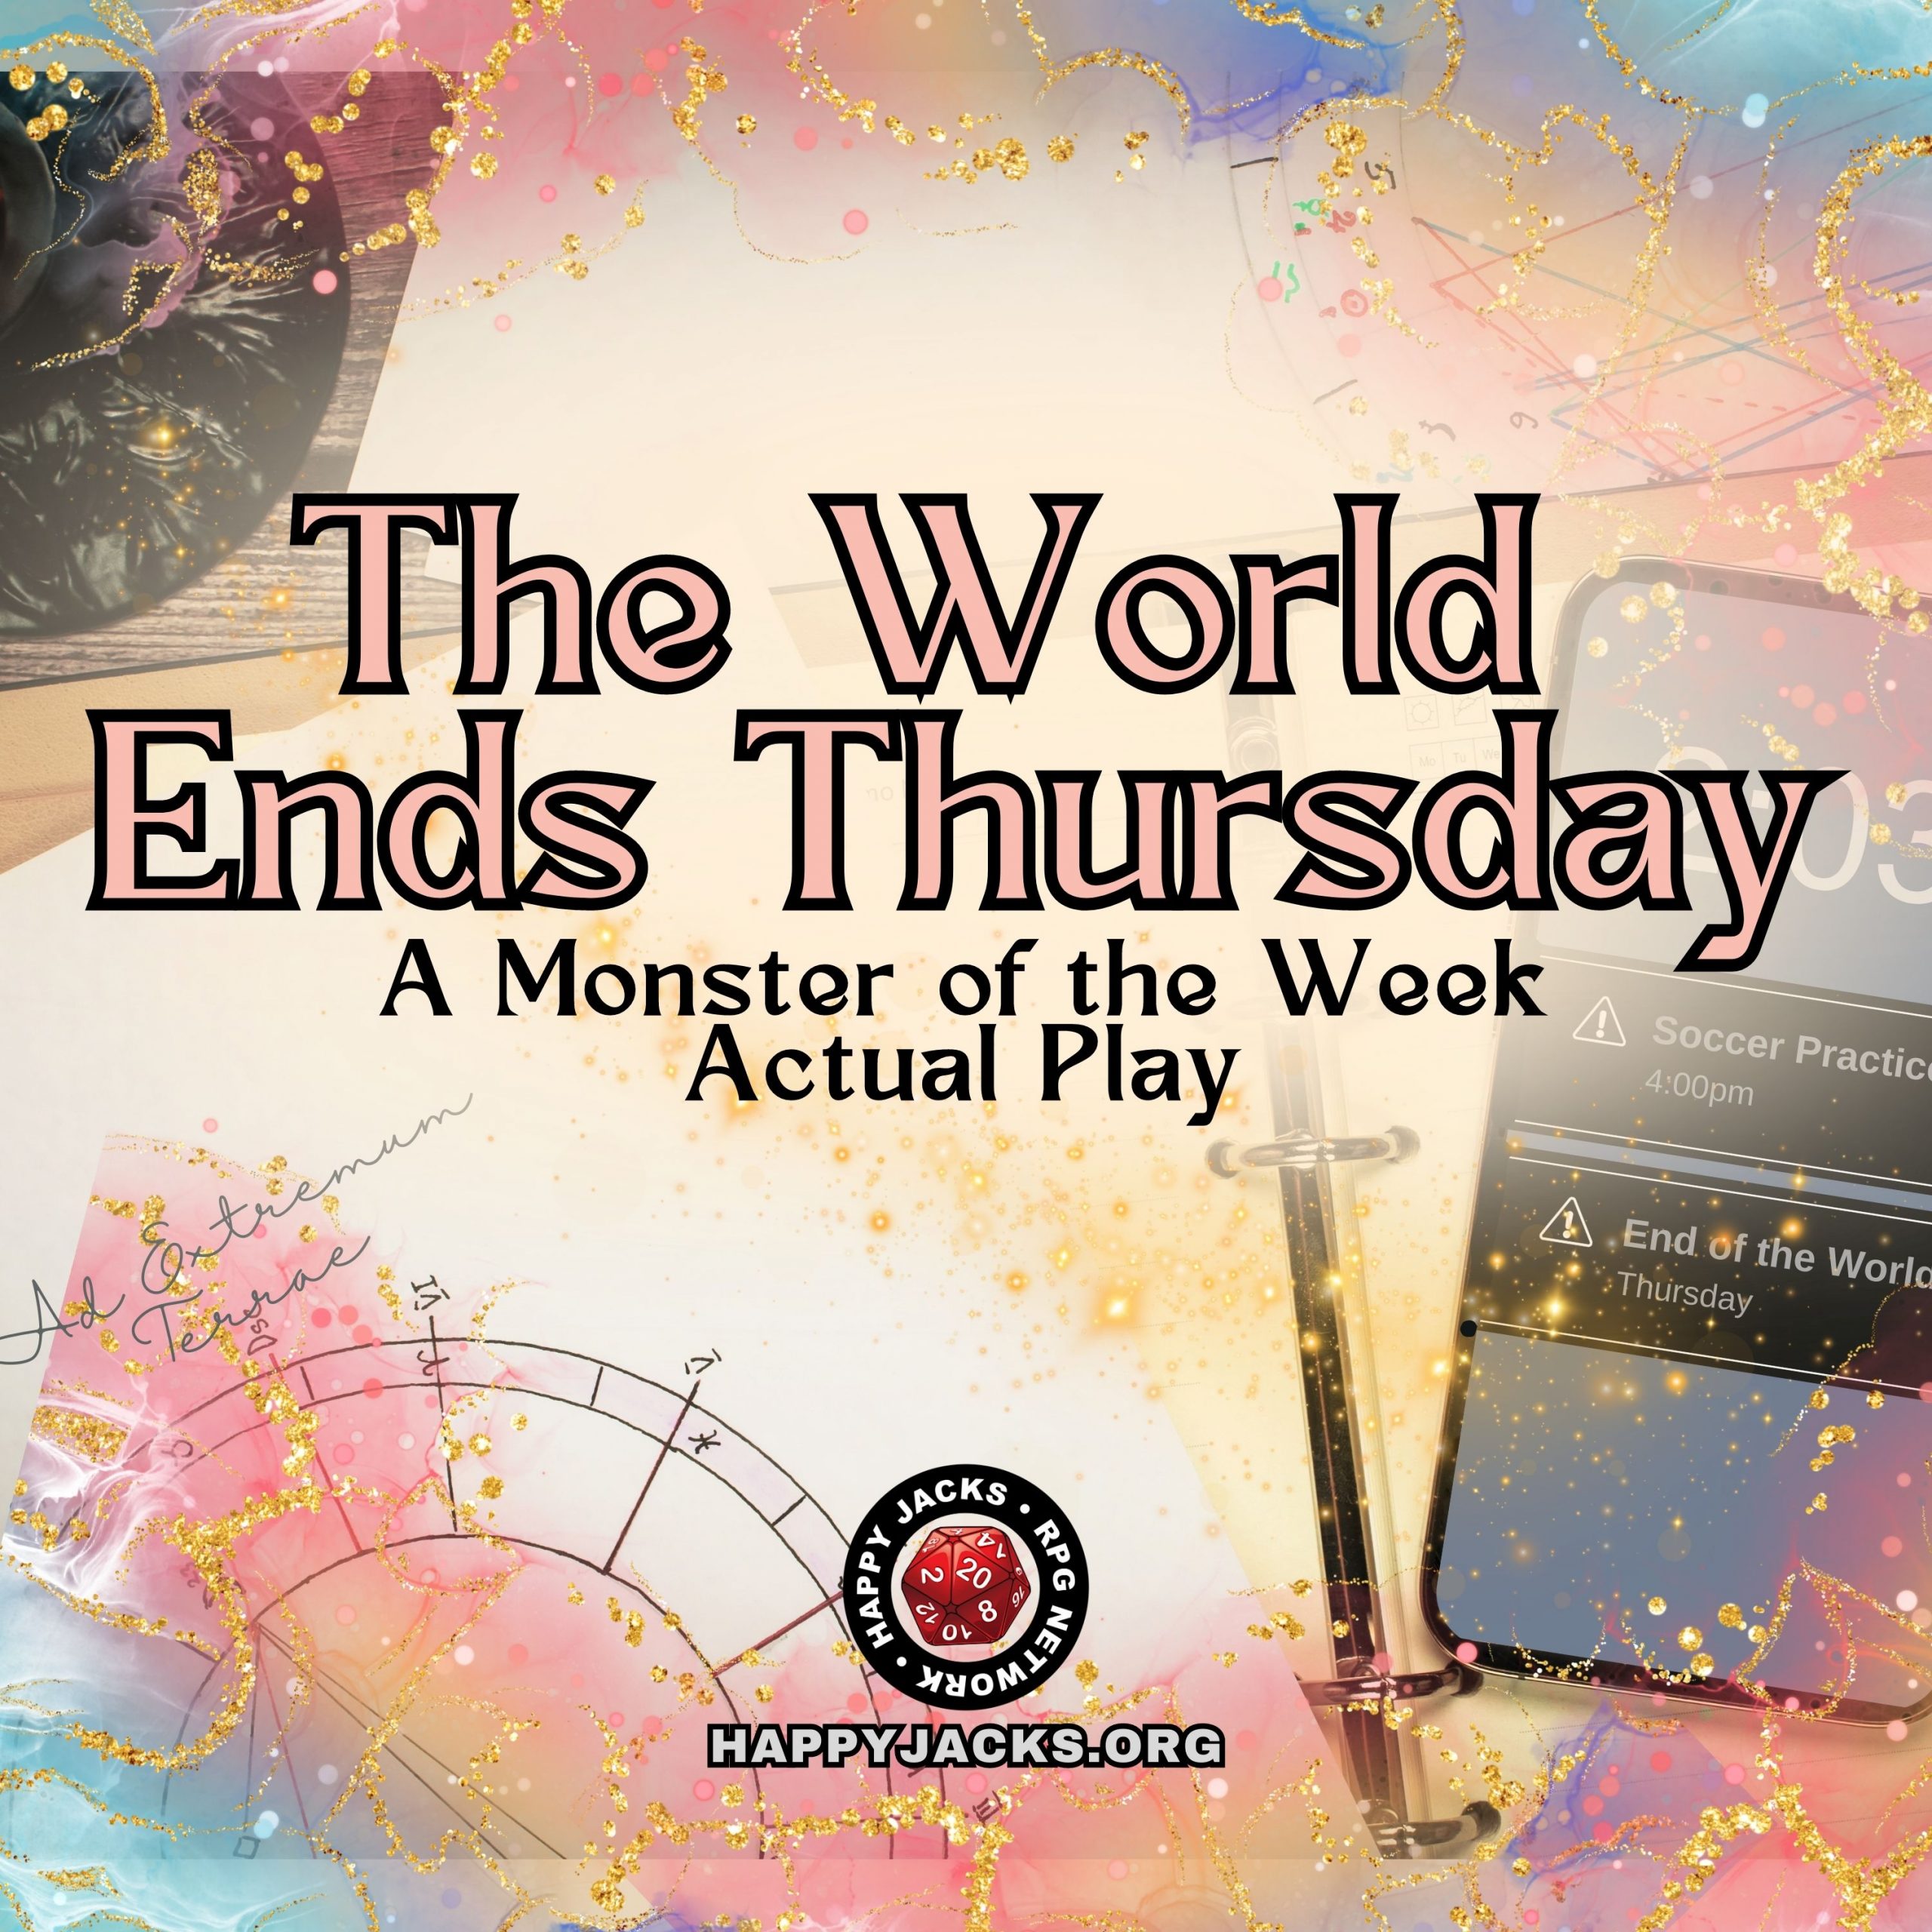 THURS03 Herald and Mods| The World Ends Thursday | Monster of the Week